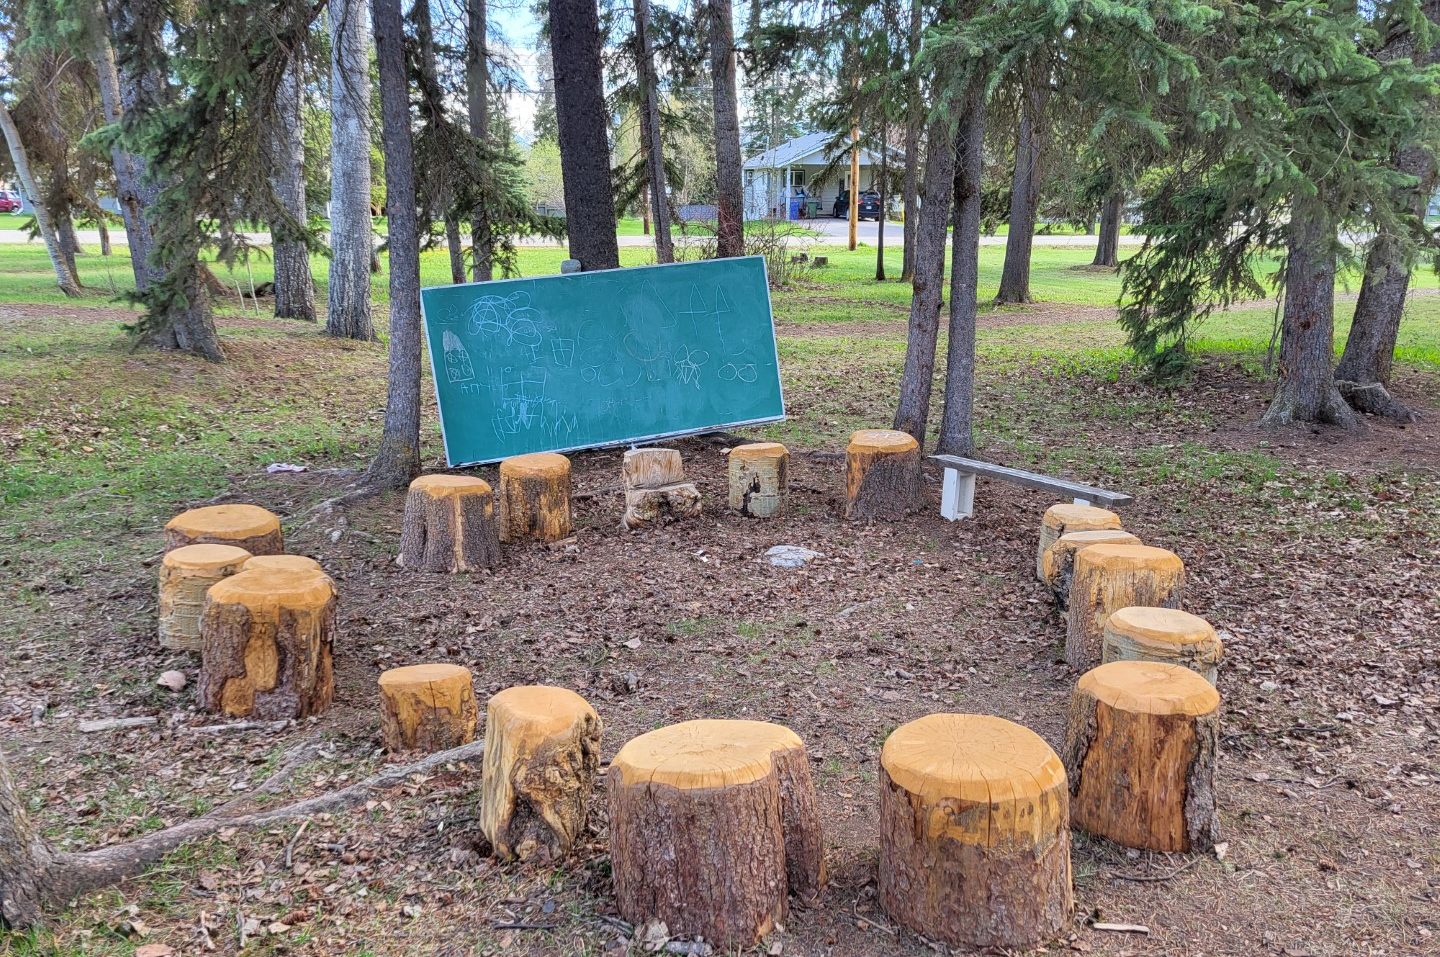 Learning Circle with Tree stumps for seating and blackboard for teaching out in nature